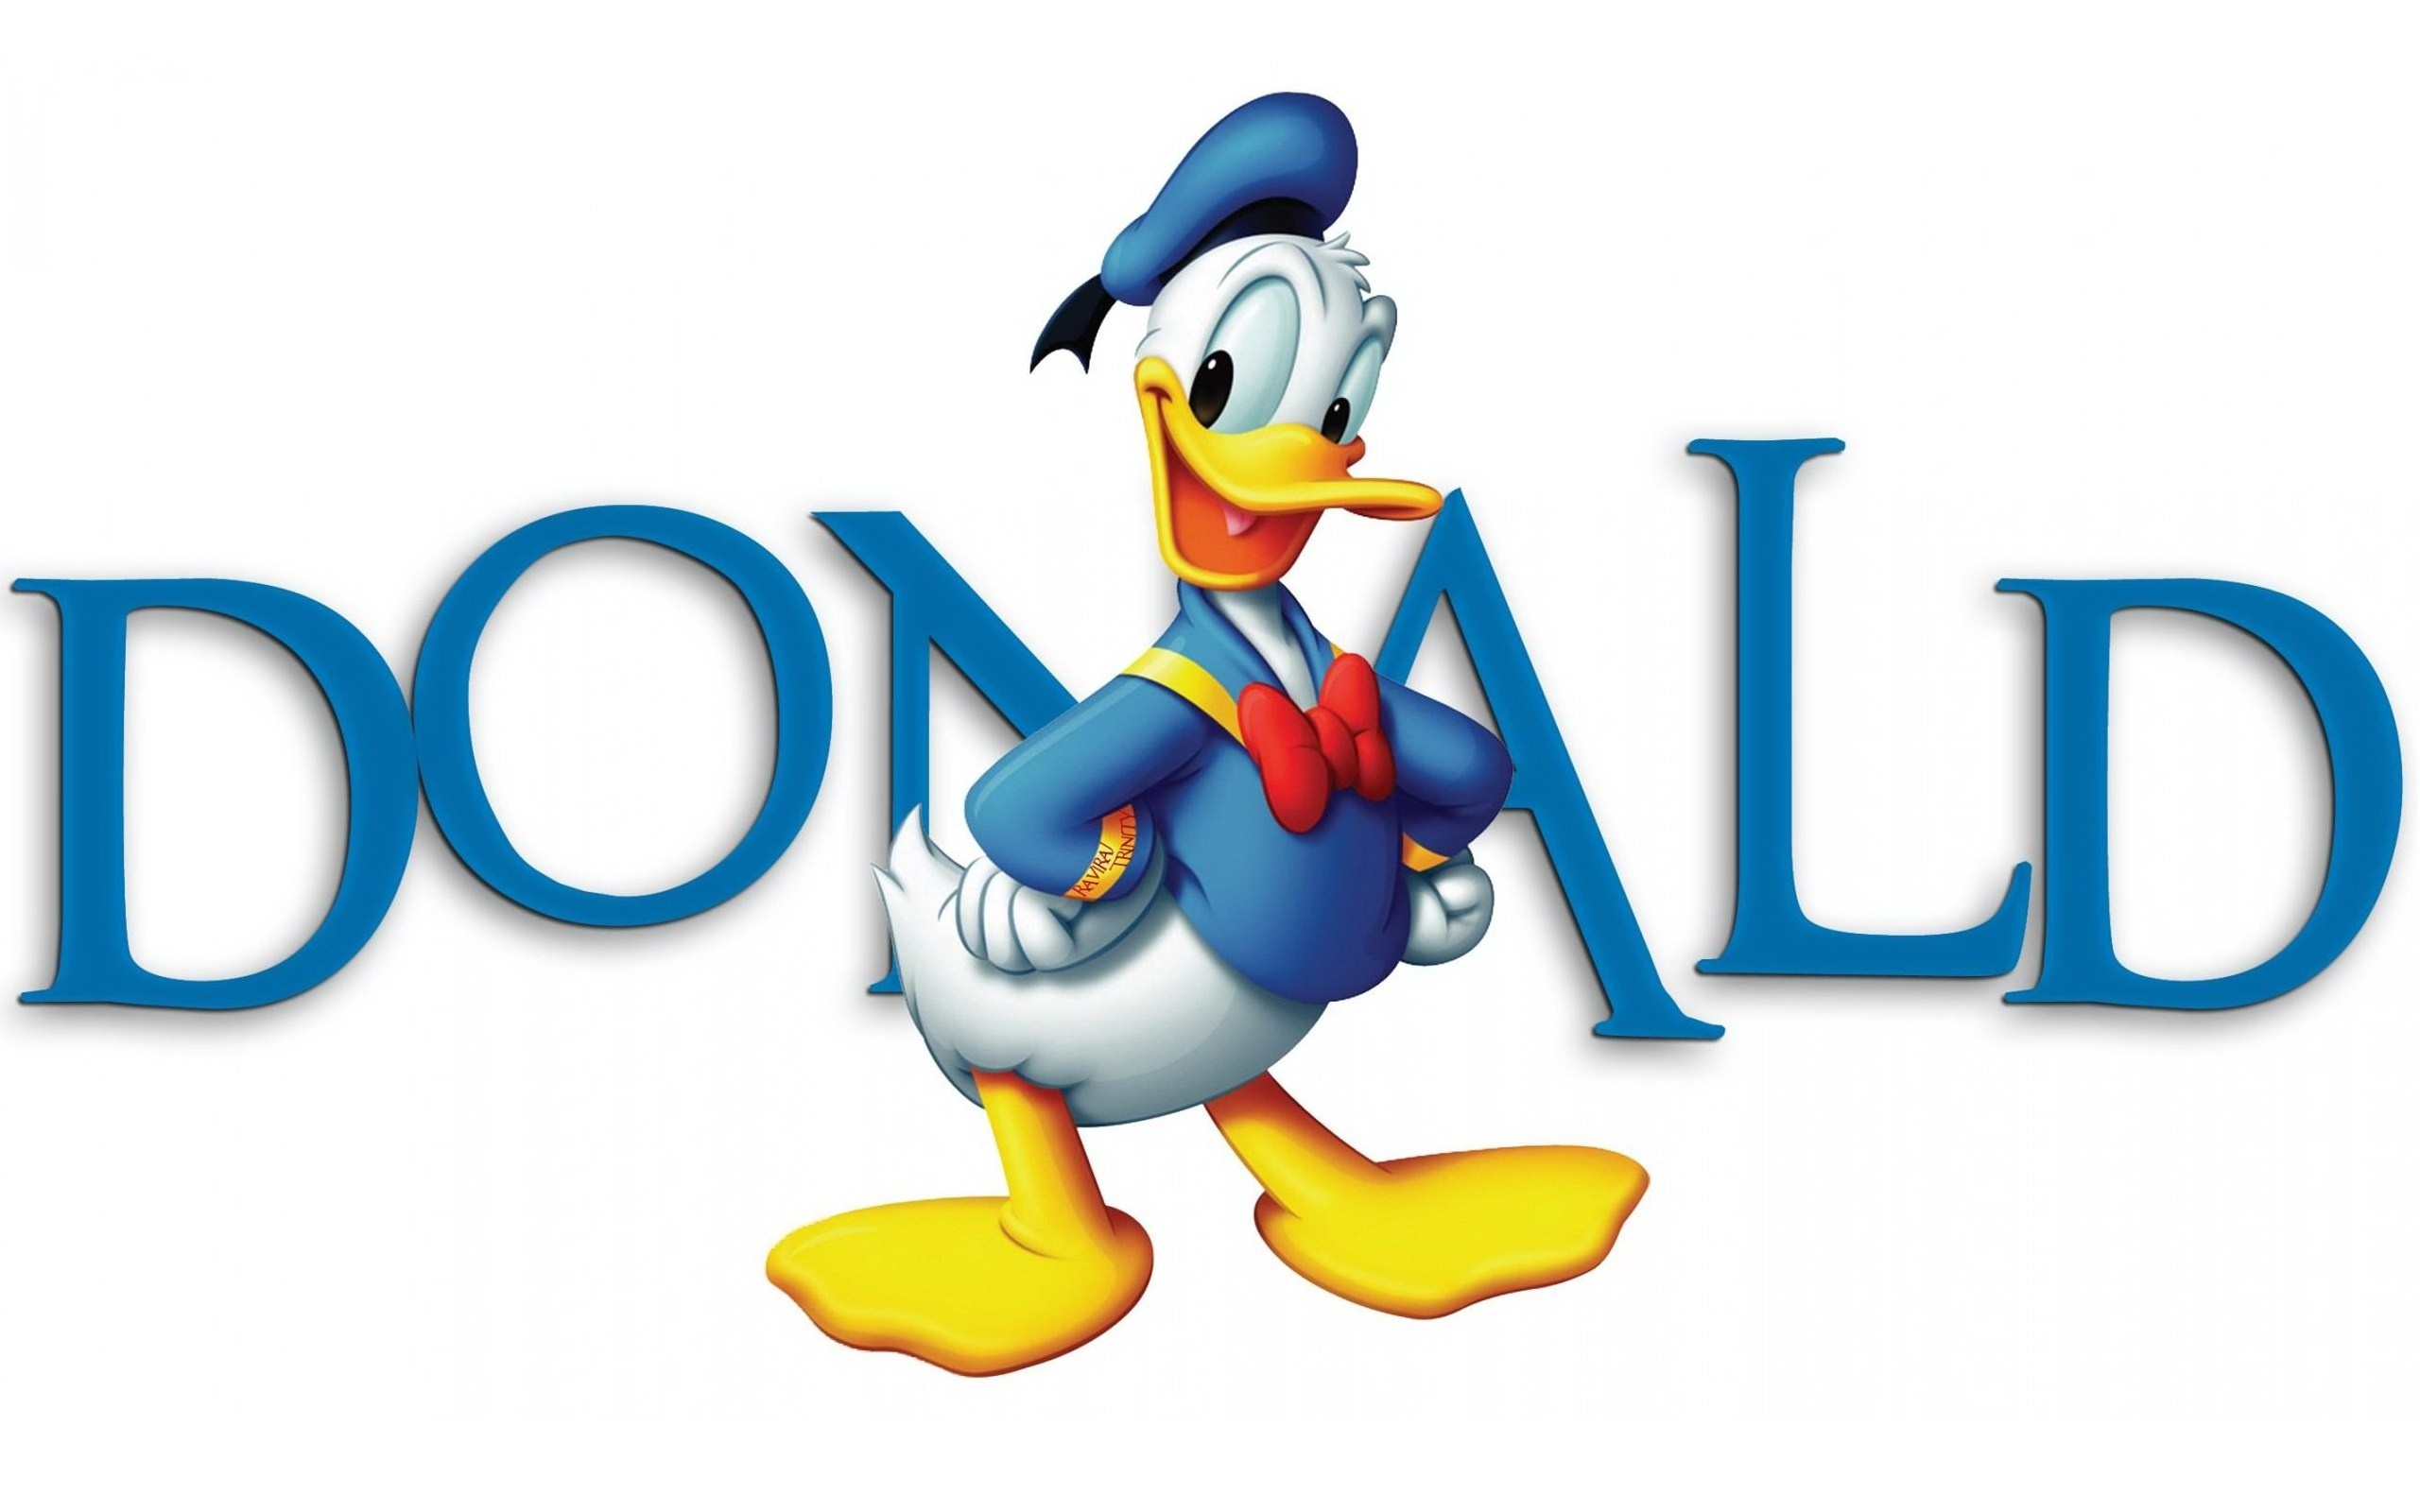 Donald Duck: A short-tempered, impatient, angry, white anthropomorphic duck, Illustration. 2560x1600 HD Wallpaper.